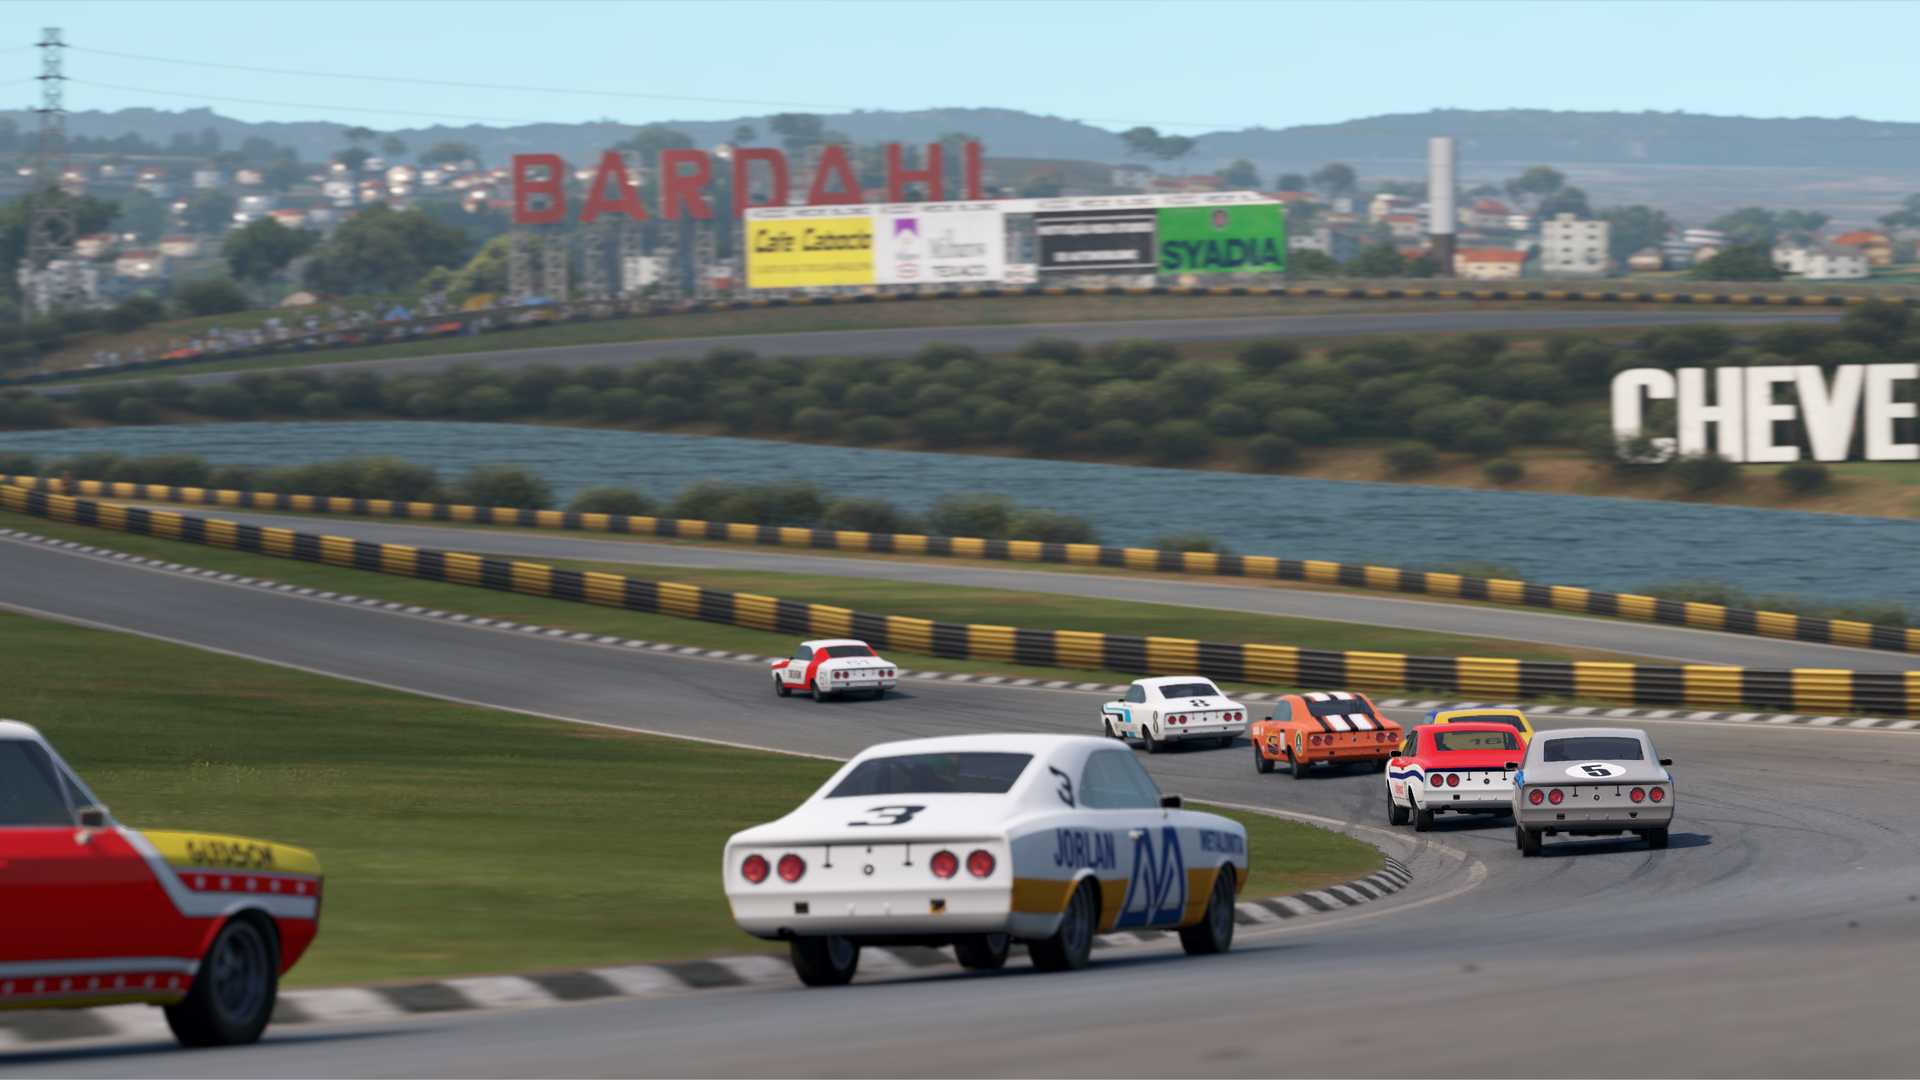 Opala 79s racing at Interlagos with a view of the surrounding city in the background